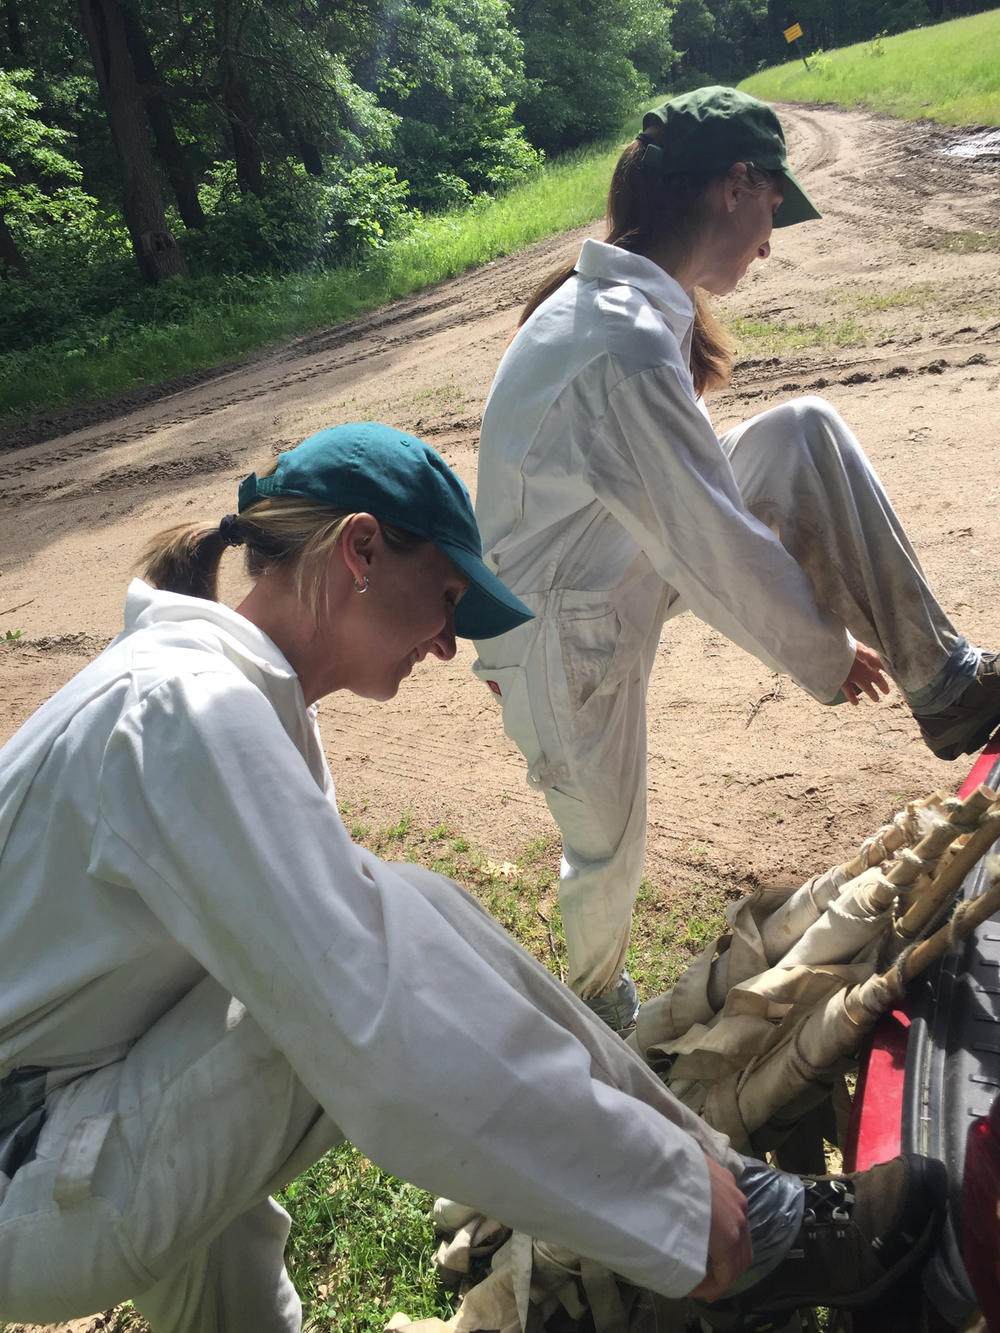 Minnesota Department of Health employees demo a smart hack for keeping critters off while out in the field: Wrap duct tape around socks and pant legs to prevent ticks from crawling in.